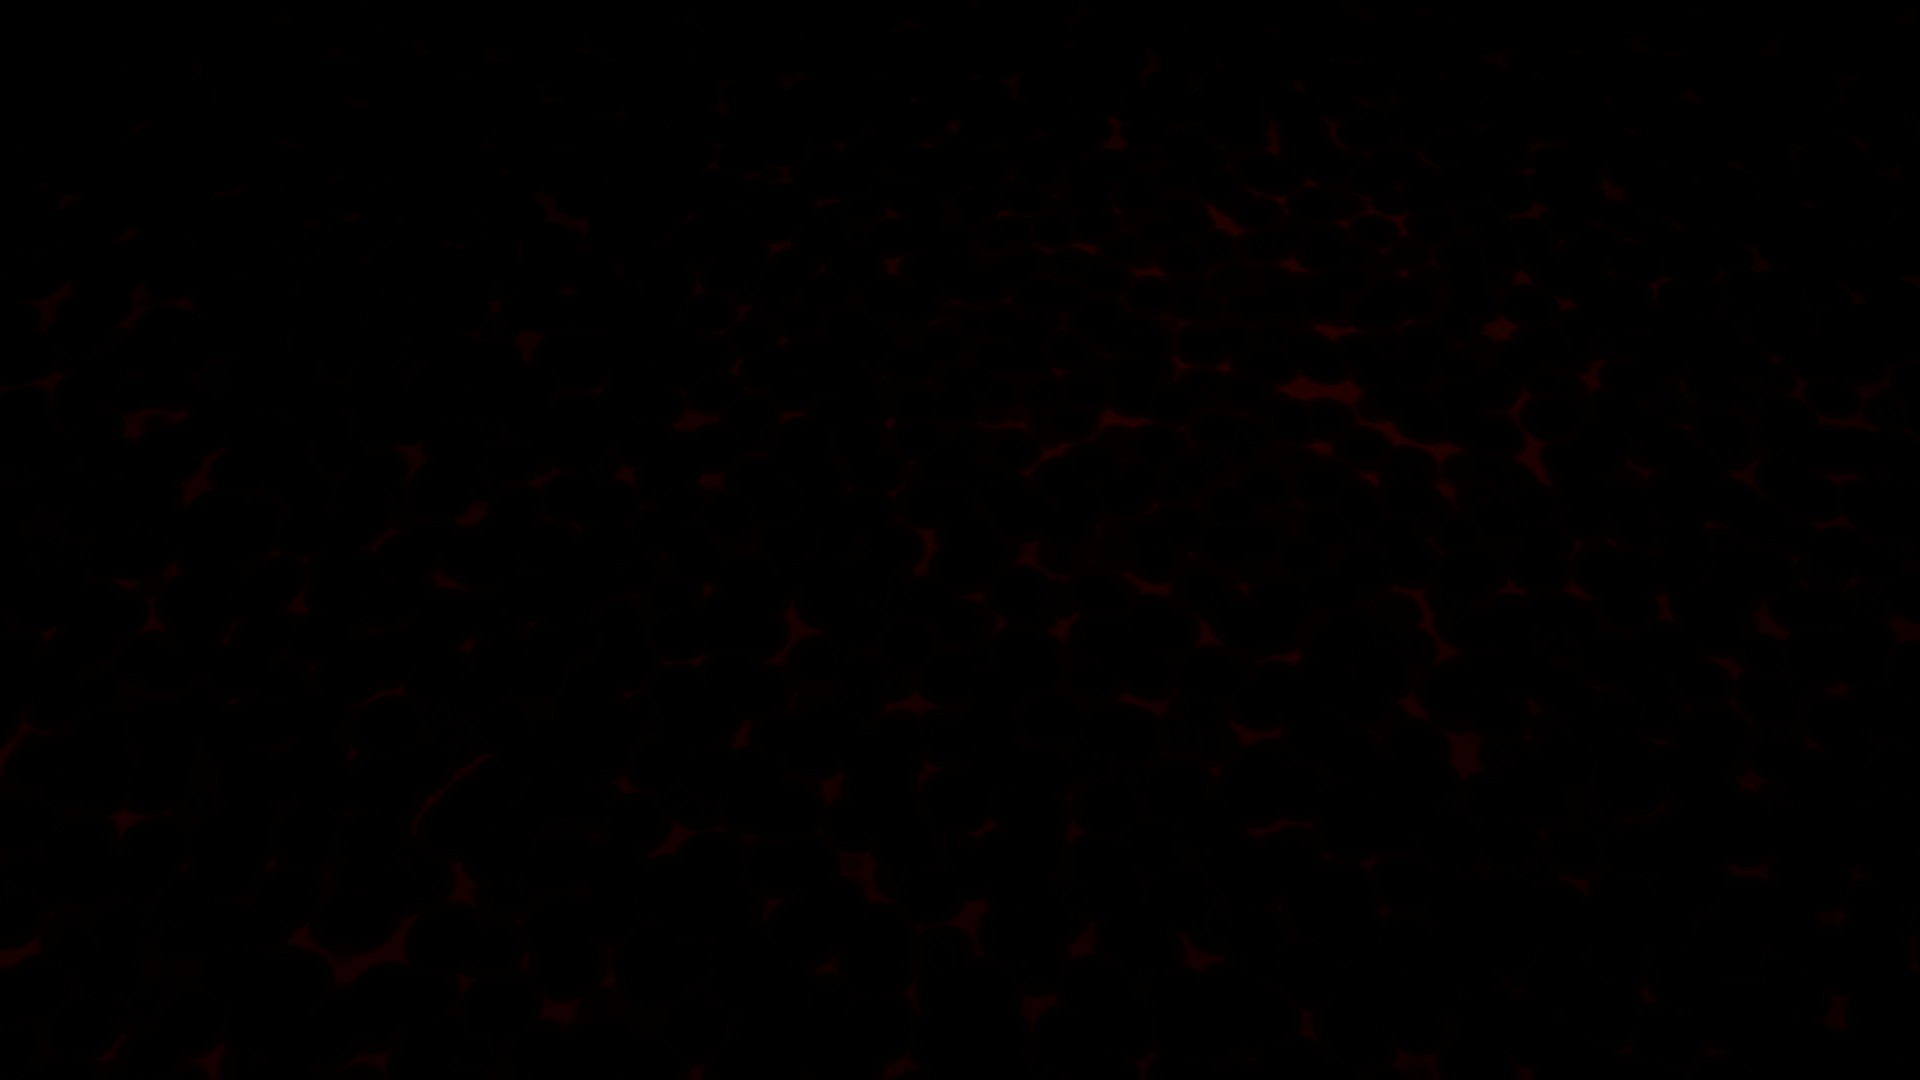 Black and Red Wallpaper HD with high-resolution 1920x1080 pixel. You can use this wallpaper for your Desktop Computer Backgrounds, Mac Wallpapers, Android Lock screen or iPhone Screensavers and another smartphone device